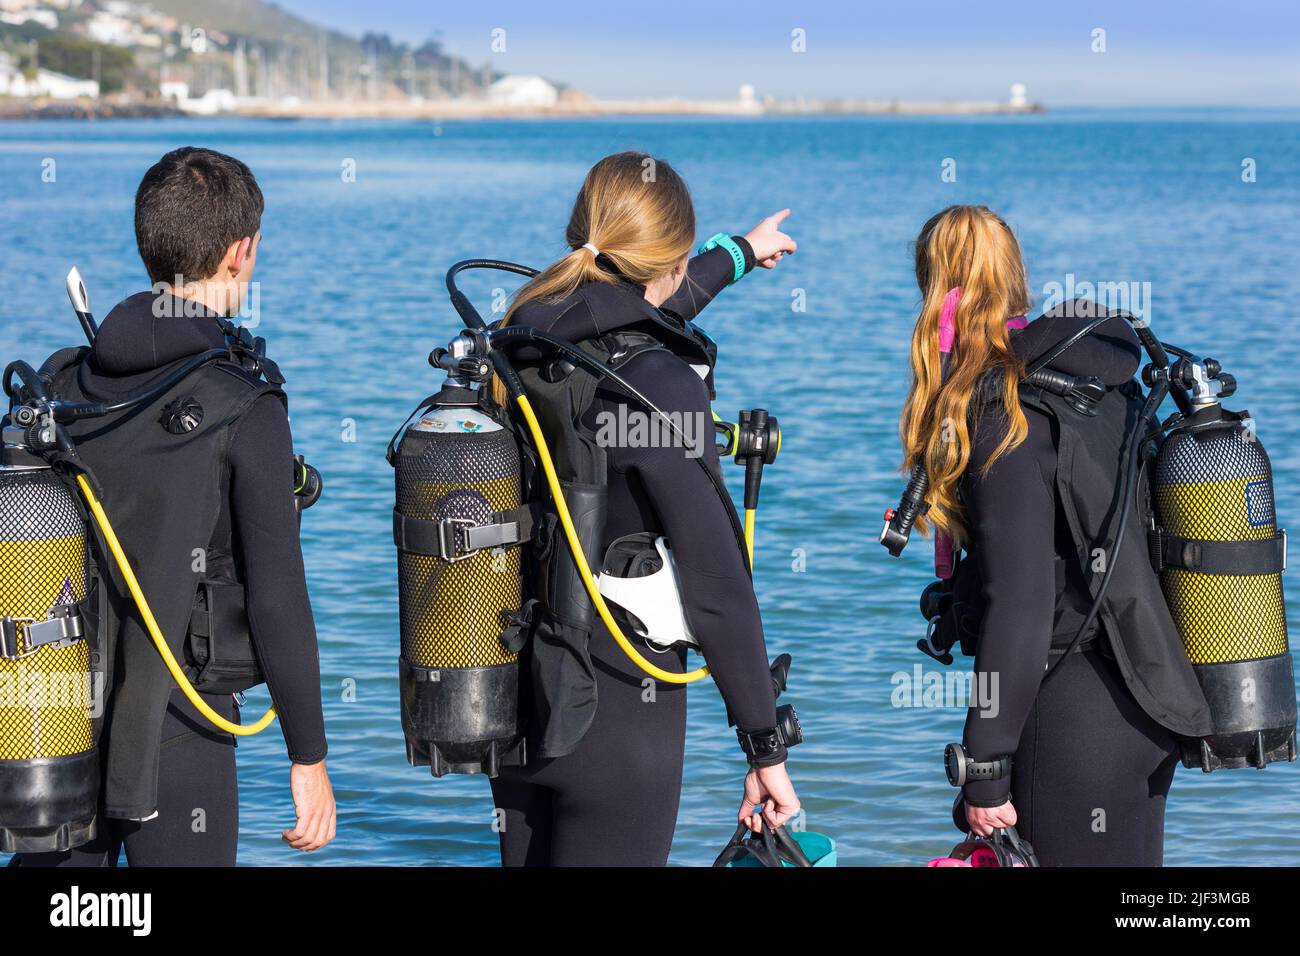 Scuba divers in training on the beach planning their dive, pointing out to sea wearing their full dive kit Stock Photo